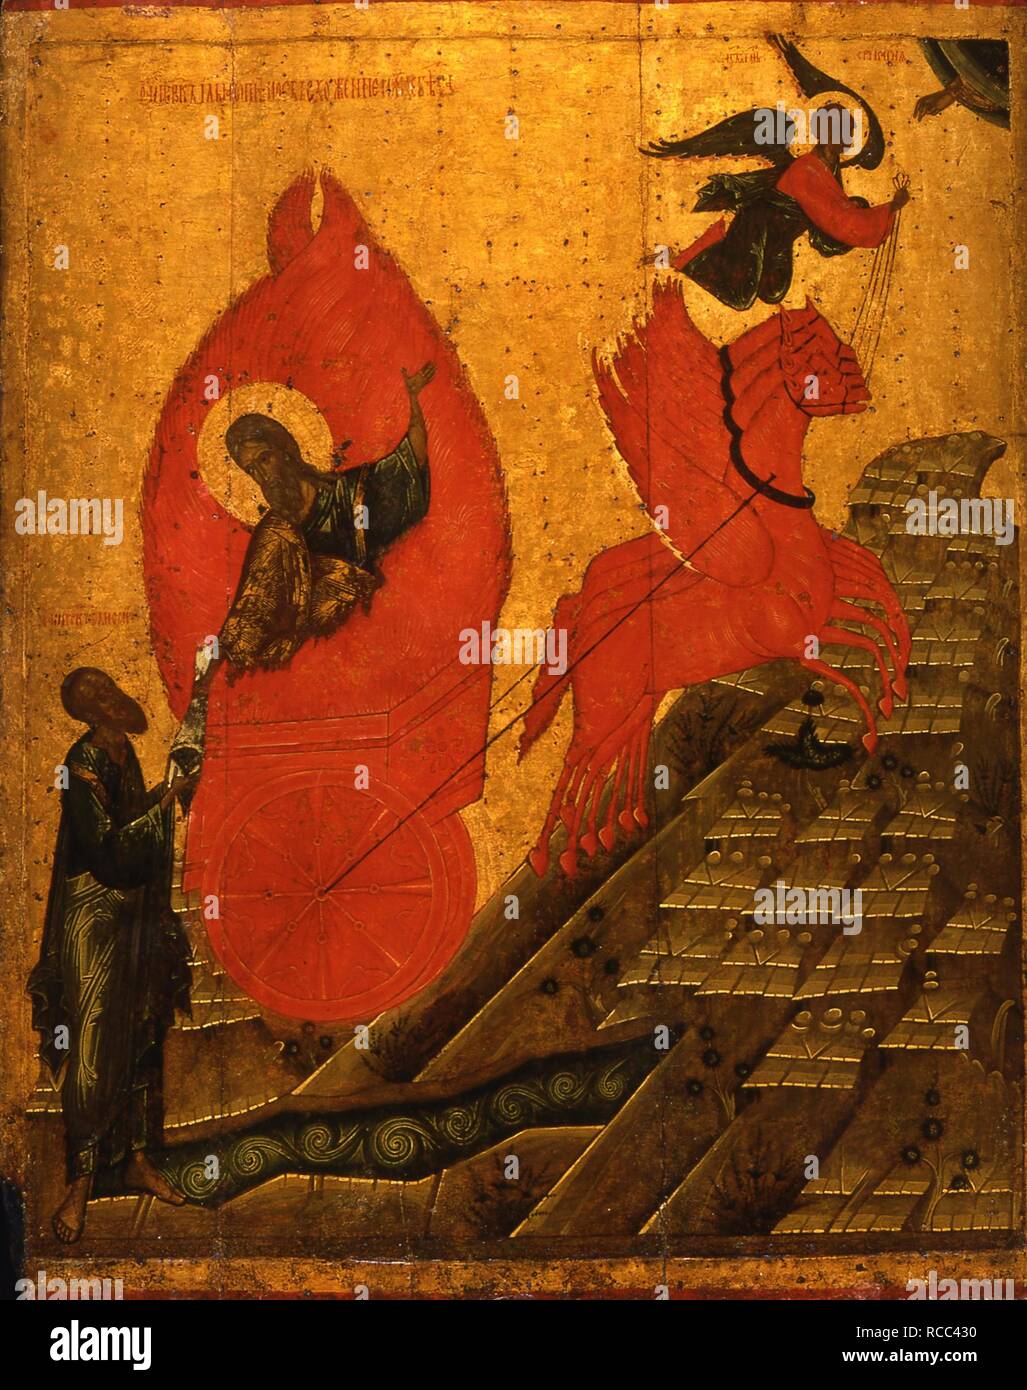 The Prophet Elijah and the Fiery Chariot. Museum: State History Museum, Moscow. Author: Russian icon. Stock Photo